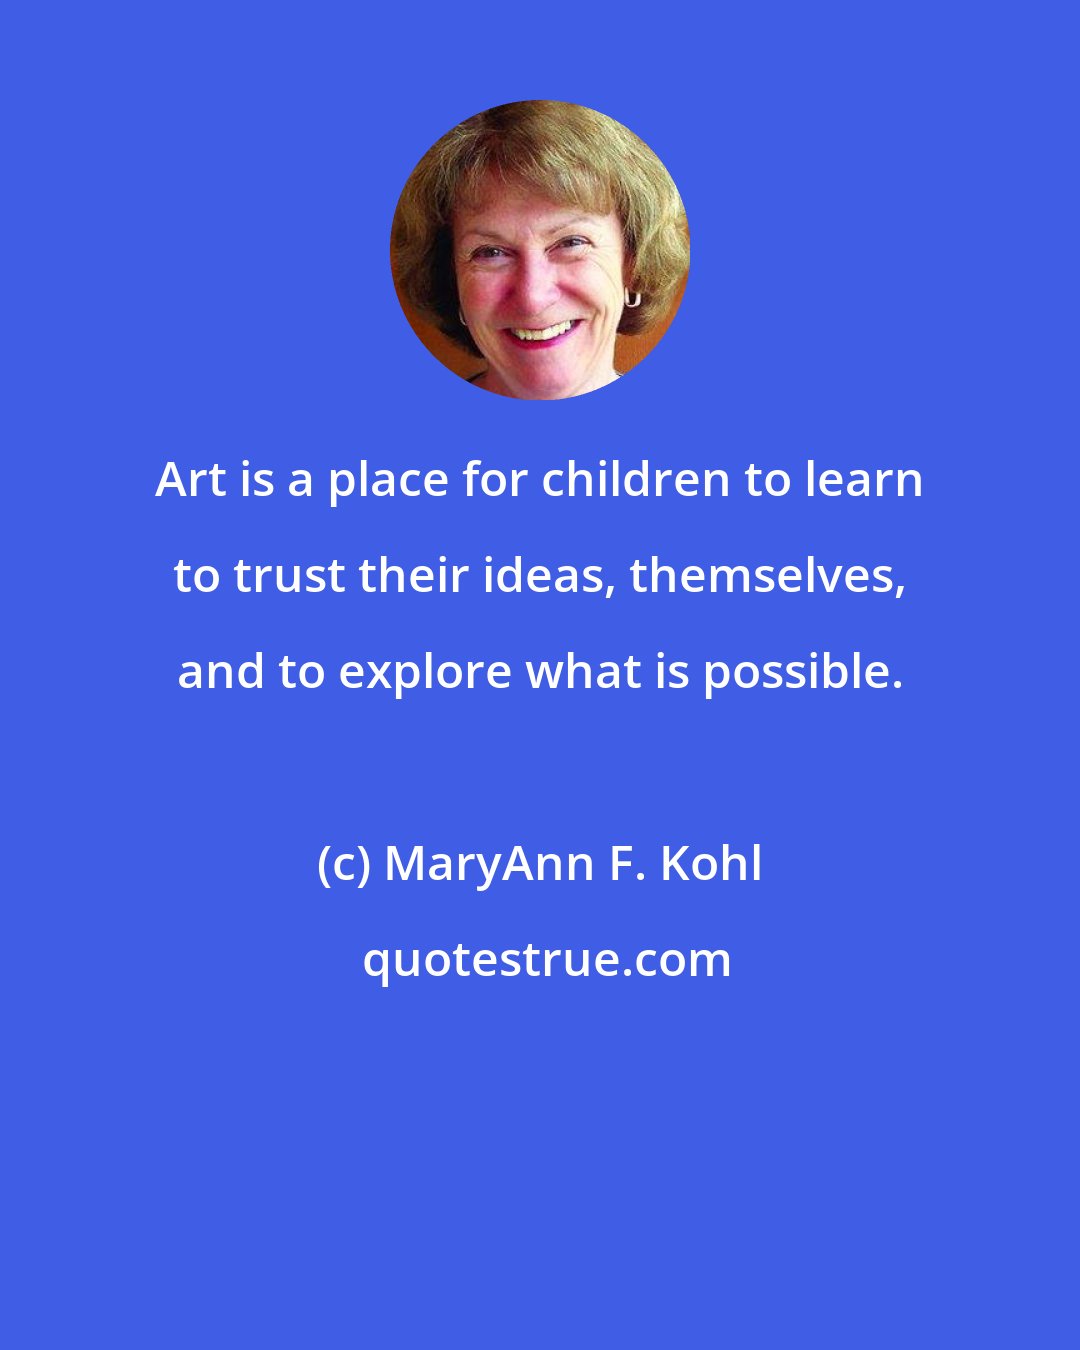 MaryAnn F. Kohl: Art is a place for children to learn to trust their ideas, themselves, and to explore what is possible.